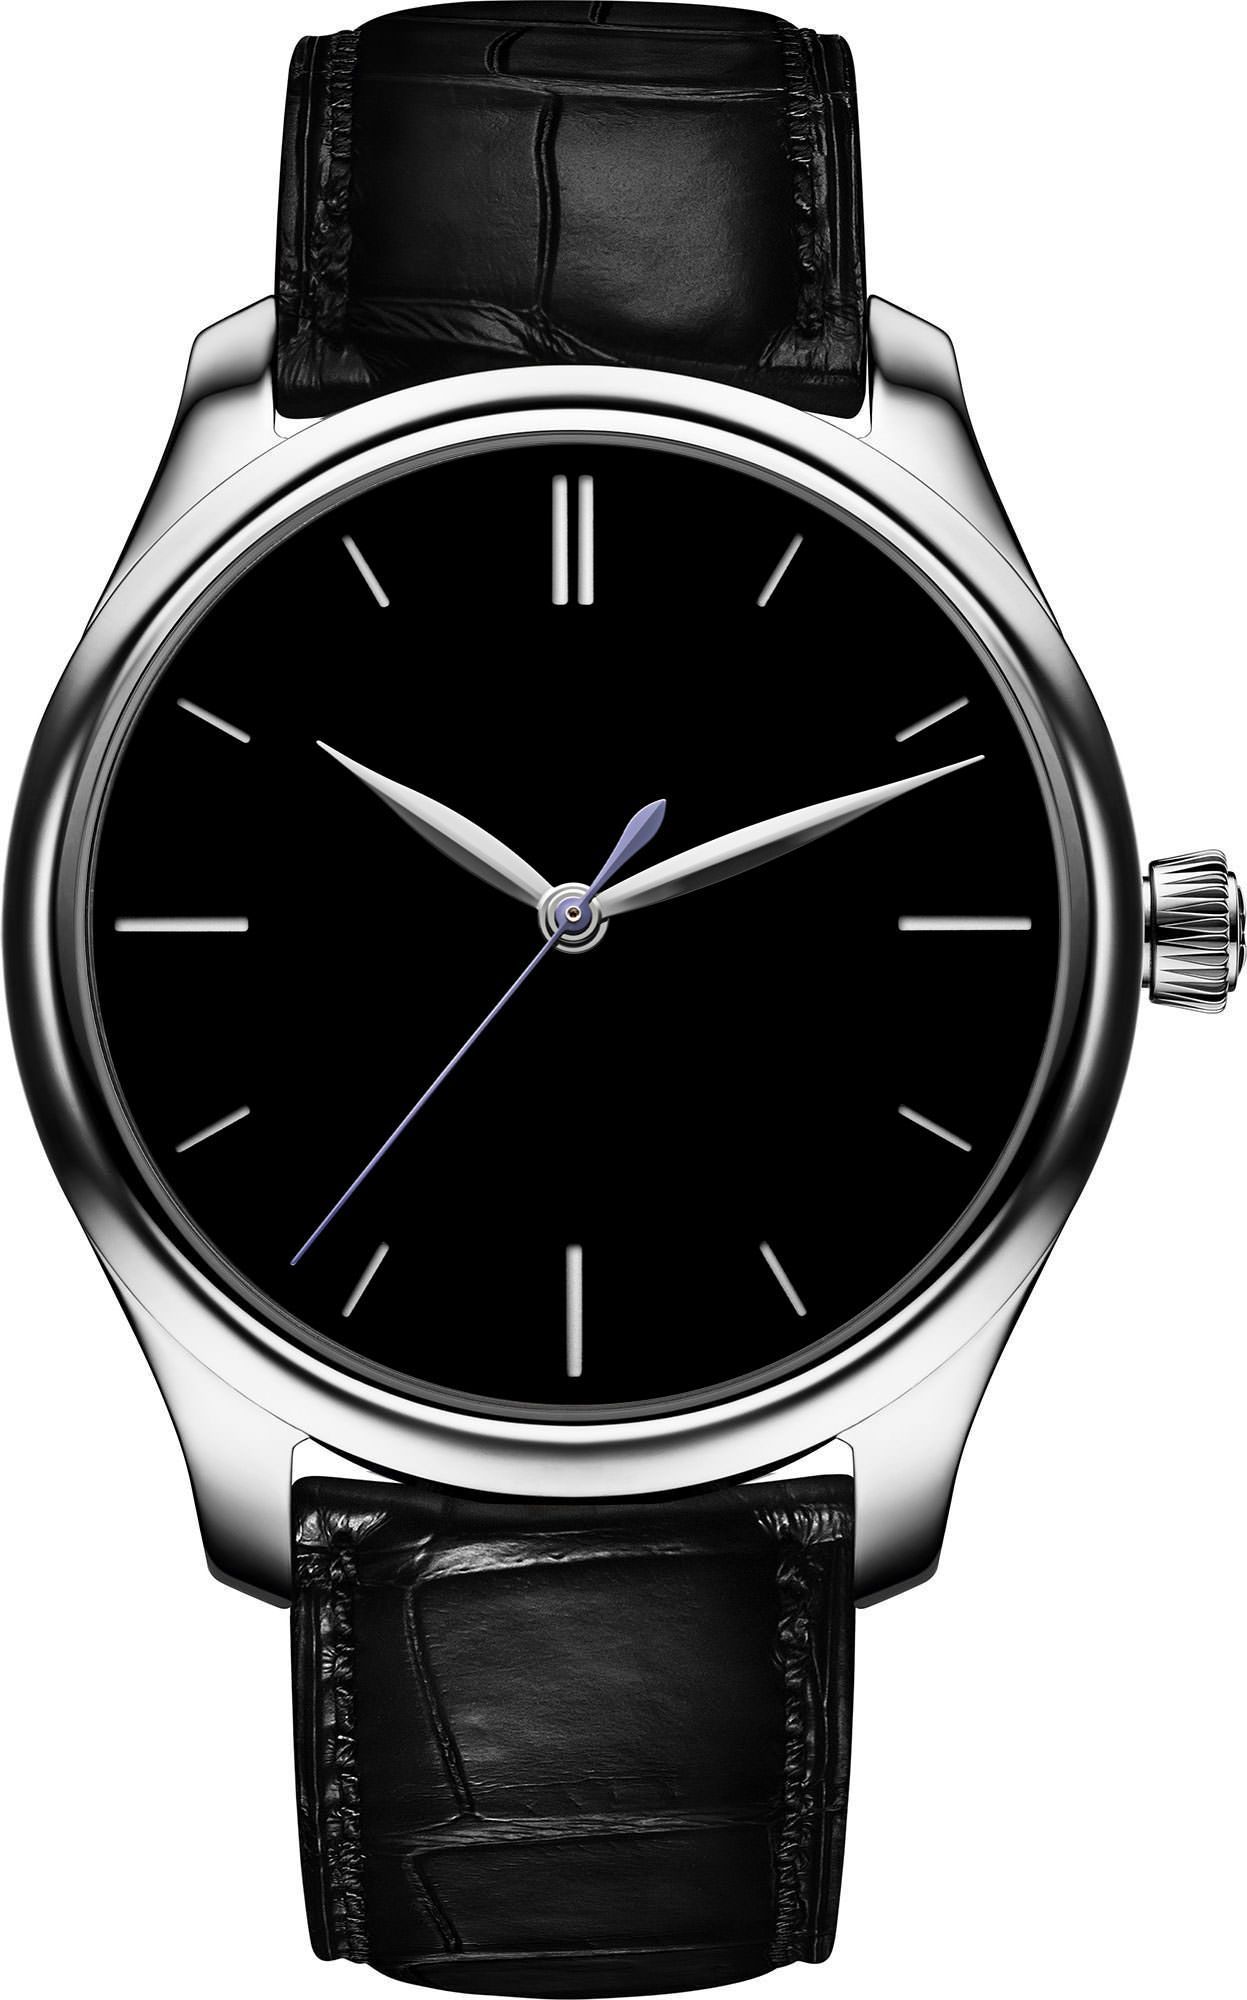 H. Moser & Cie. Centre Seconds 40 mm Watch in Black Dial For Men - 1